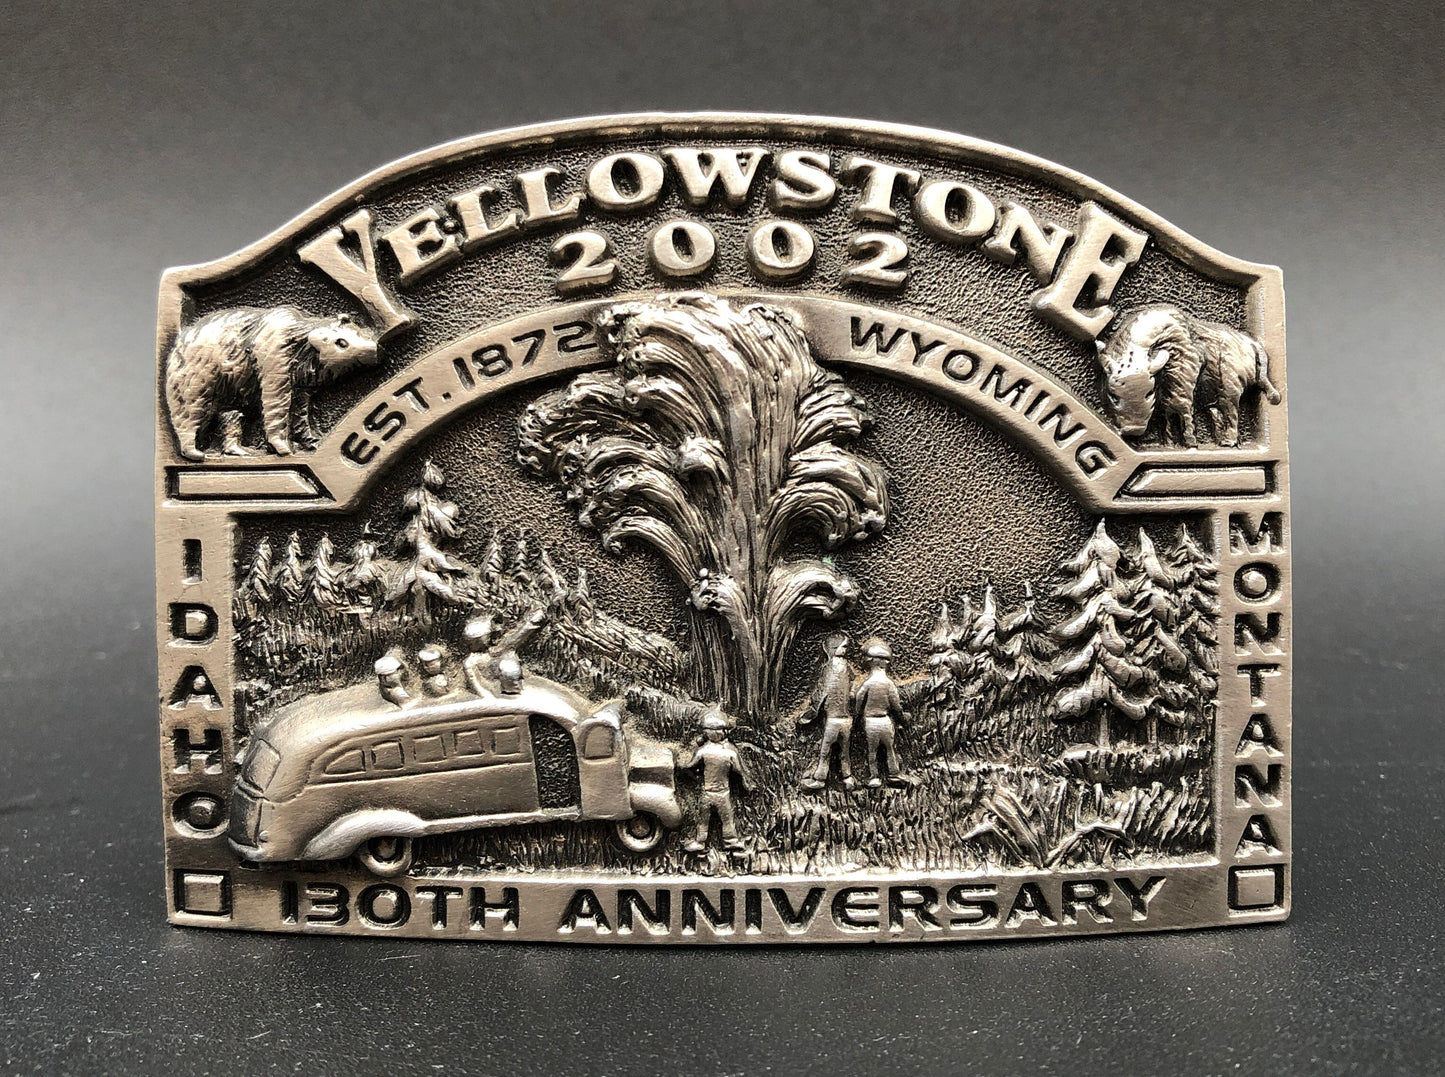 Yellowstone 2002 - 130th Anniversary Limited Edition Belt Buckle - #125/1000